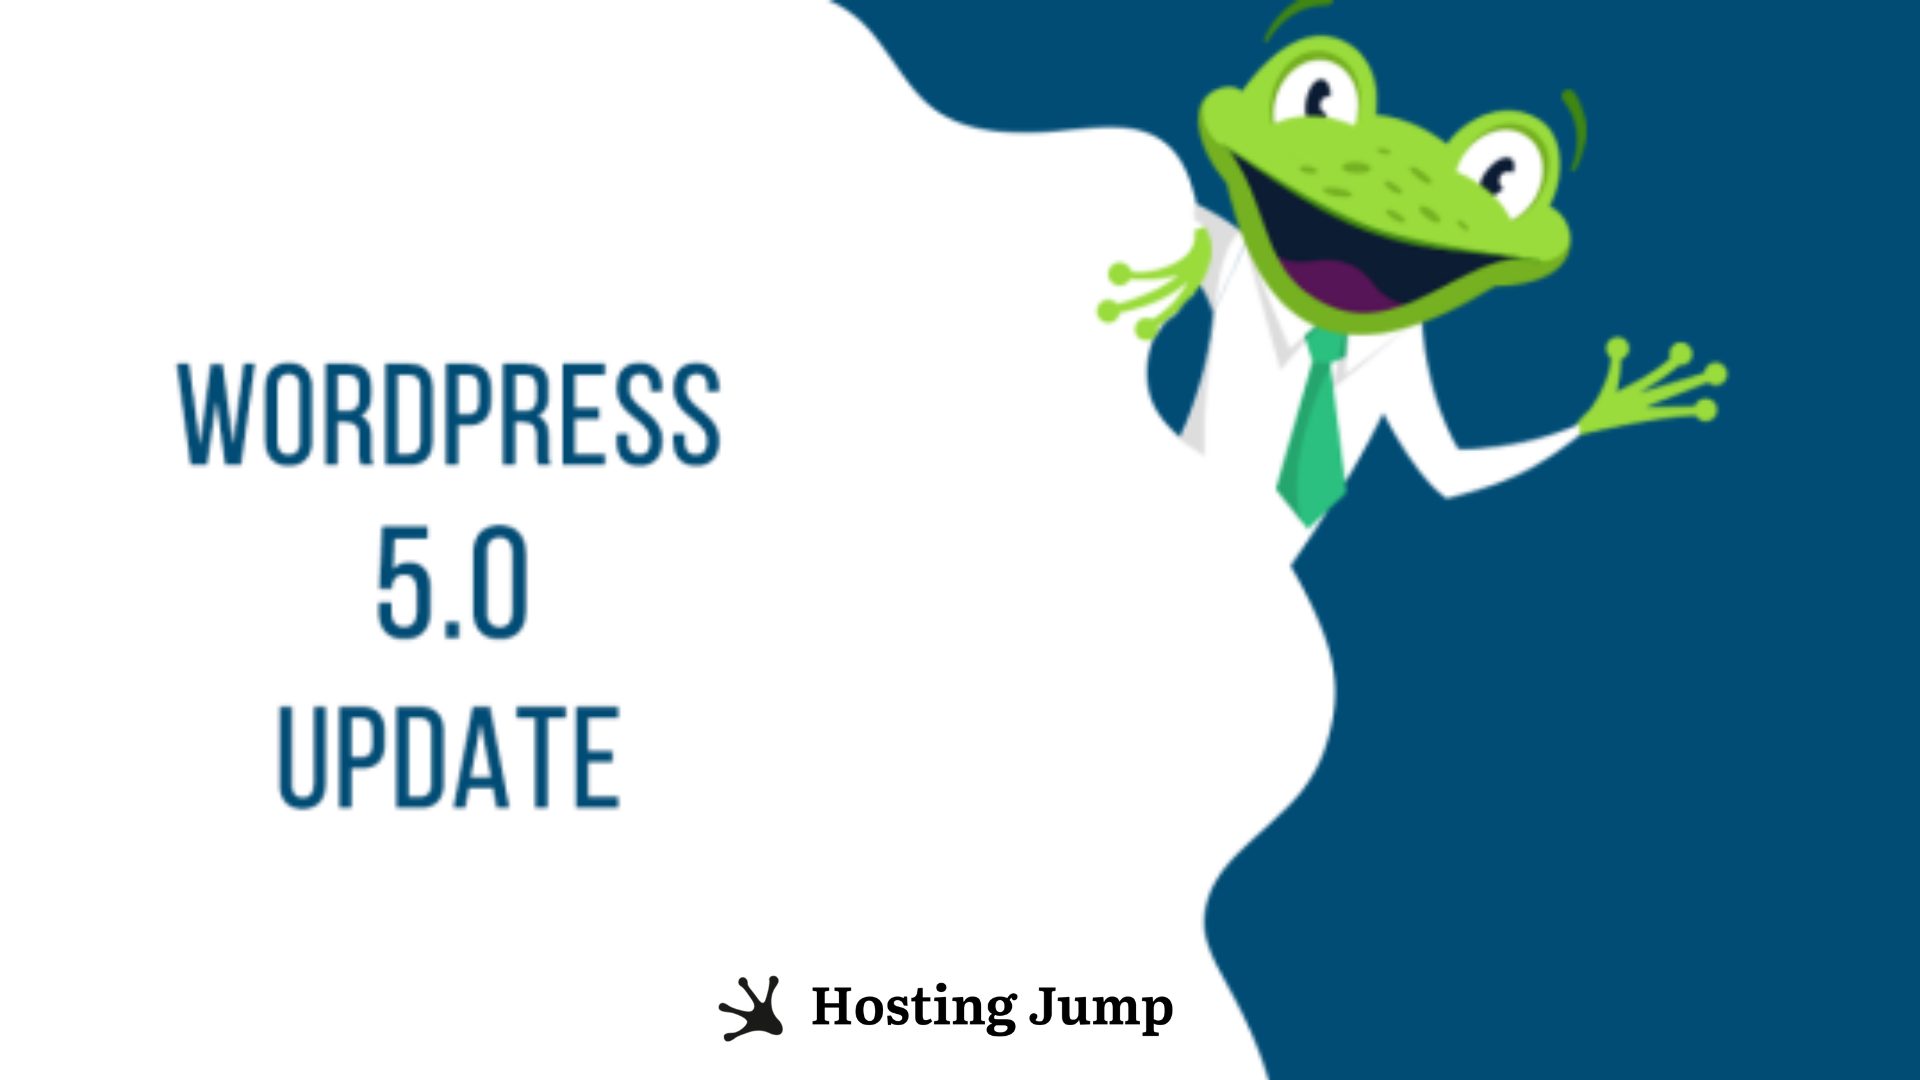 WordPress 5.0 - What's New and How to Update Without Troubles